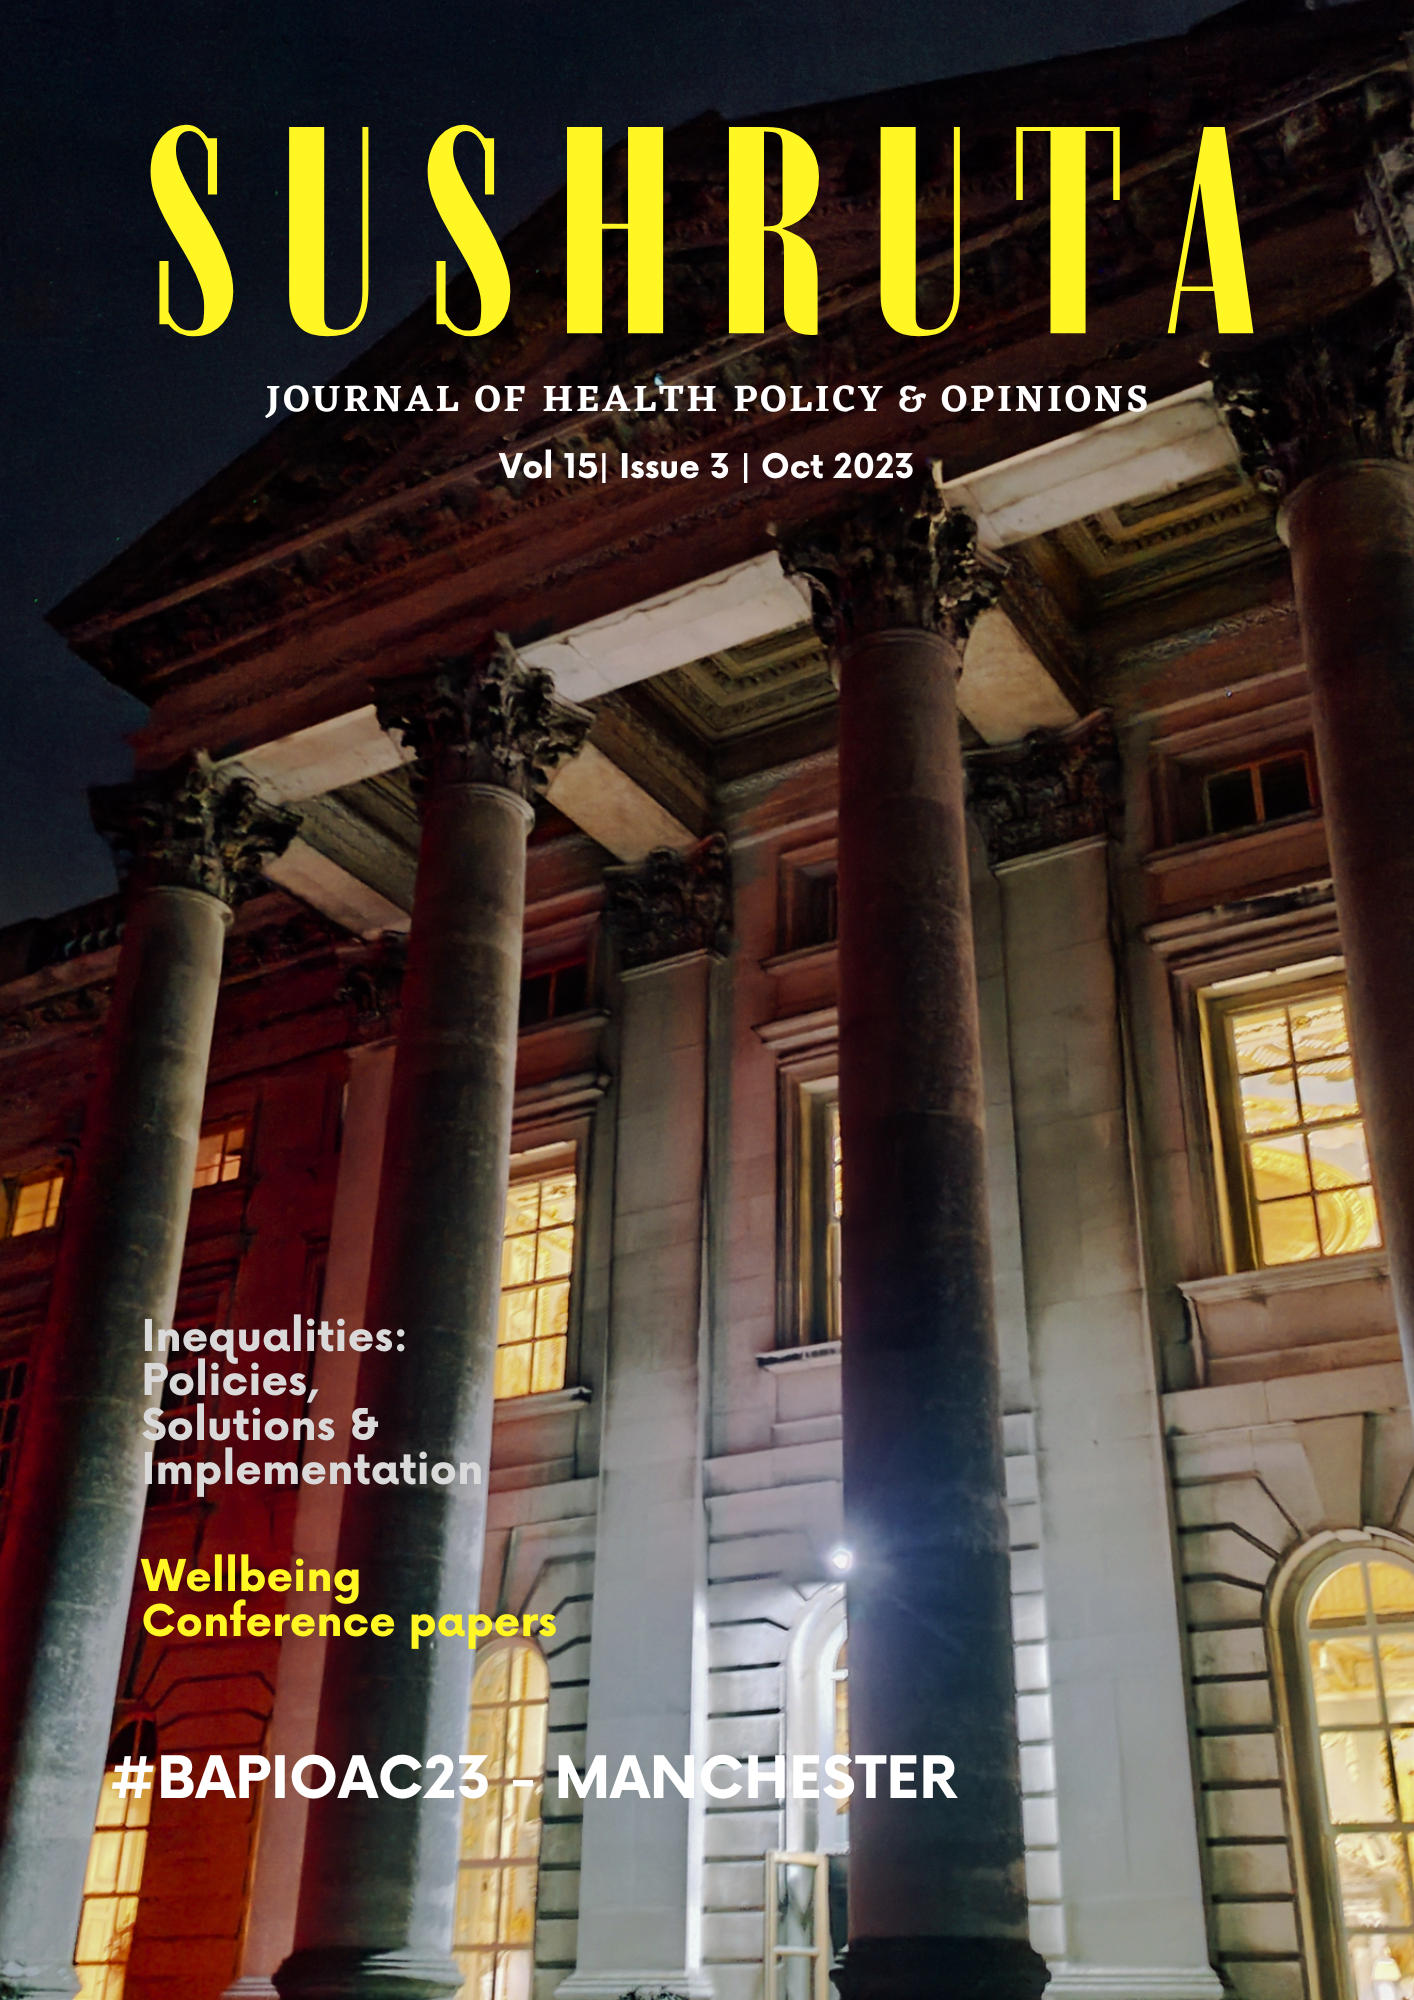 sushruta cover showing a regal building at night